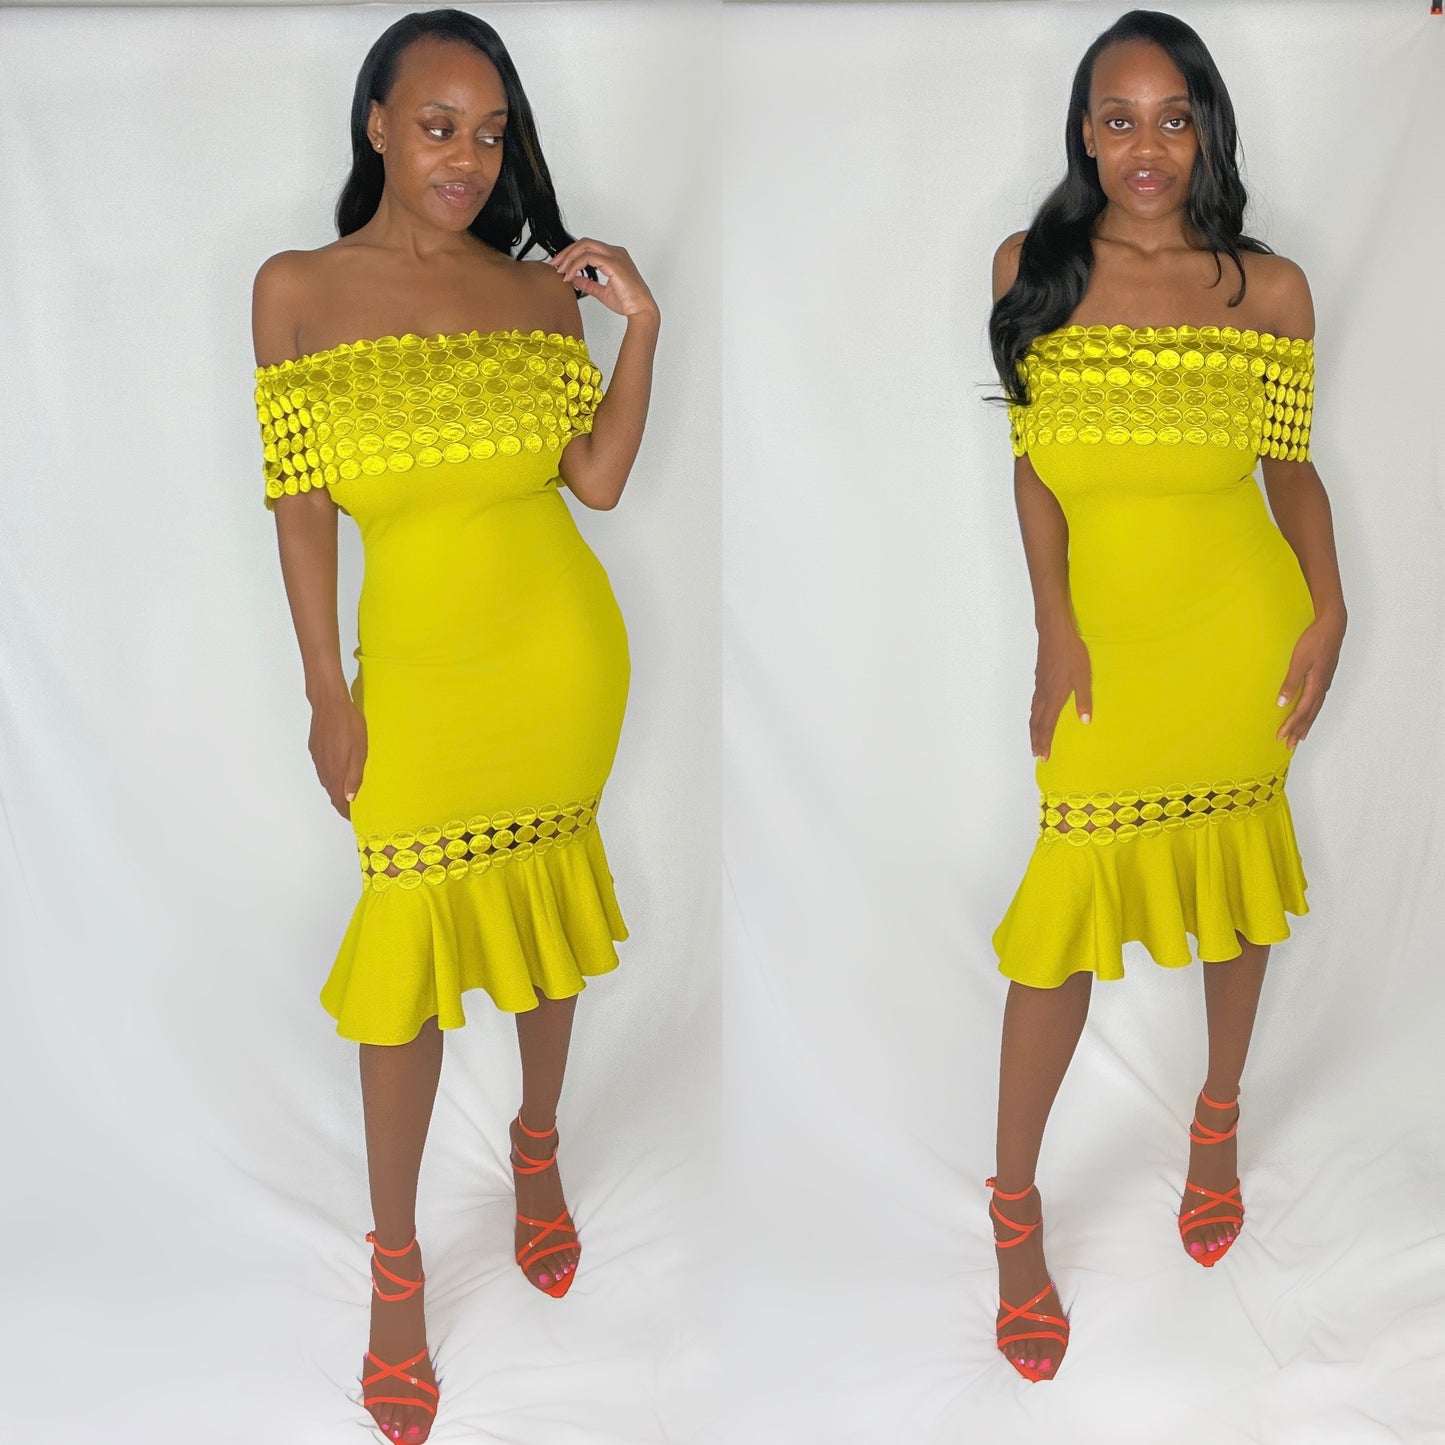 "Lady of the Hour" Crochet Band Off-The-Shoulder Fashion Dress